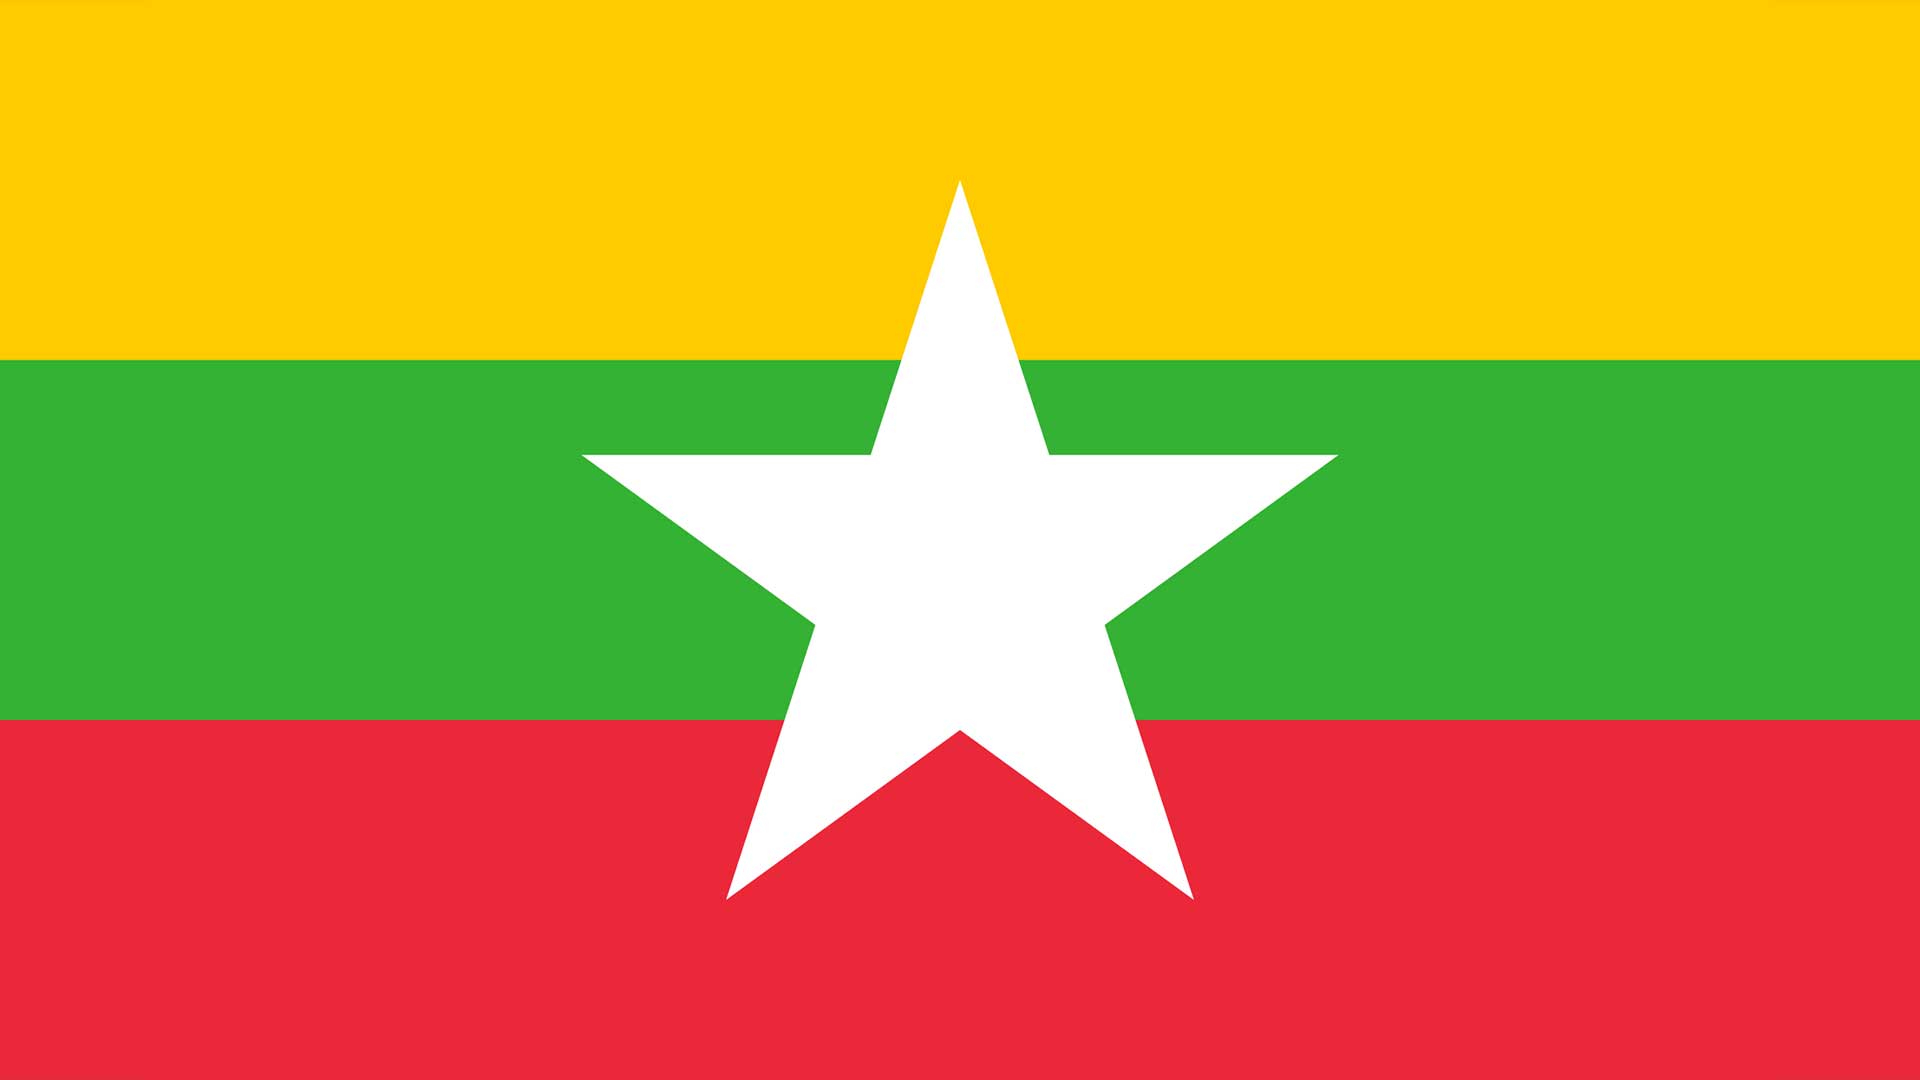 A red green and yellow flag